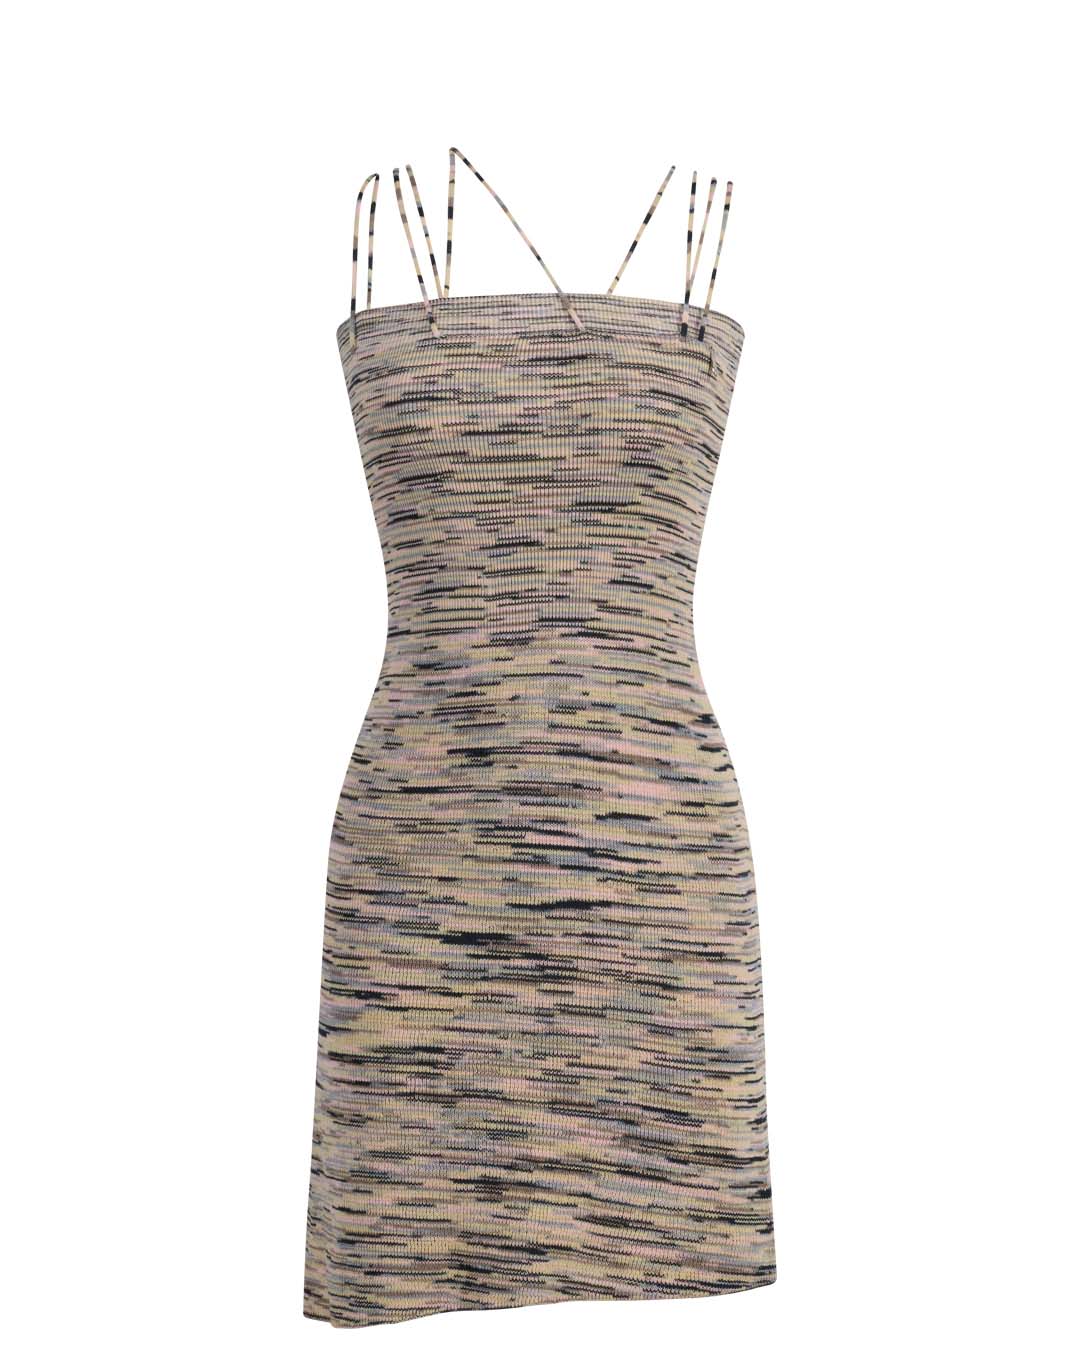 RIBBED DRESS IN SPACE DYED COTTON